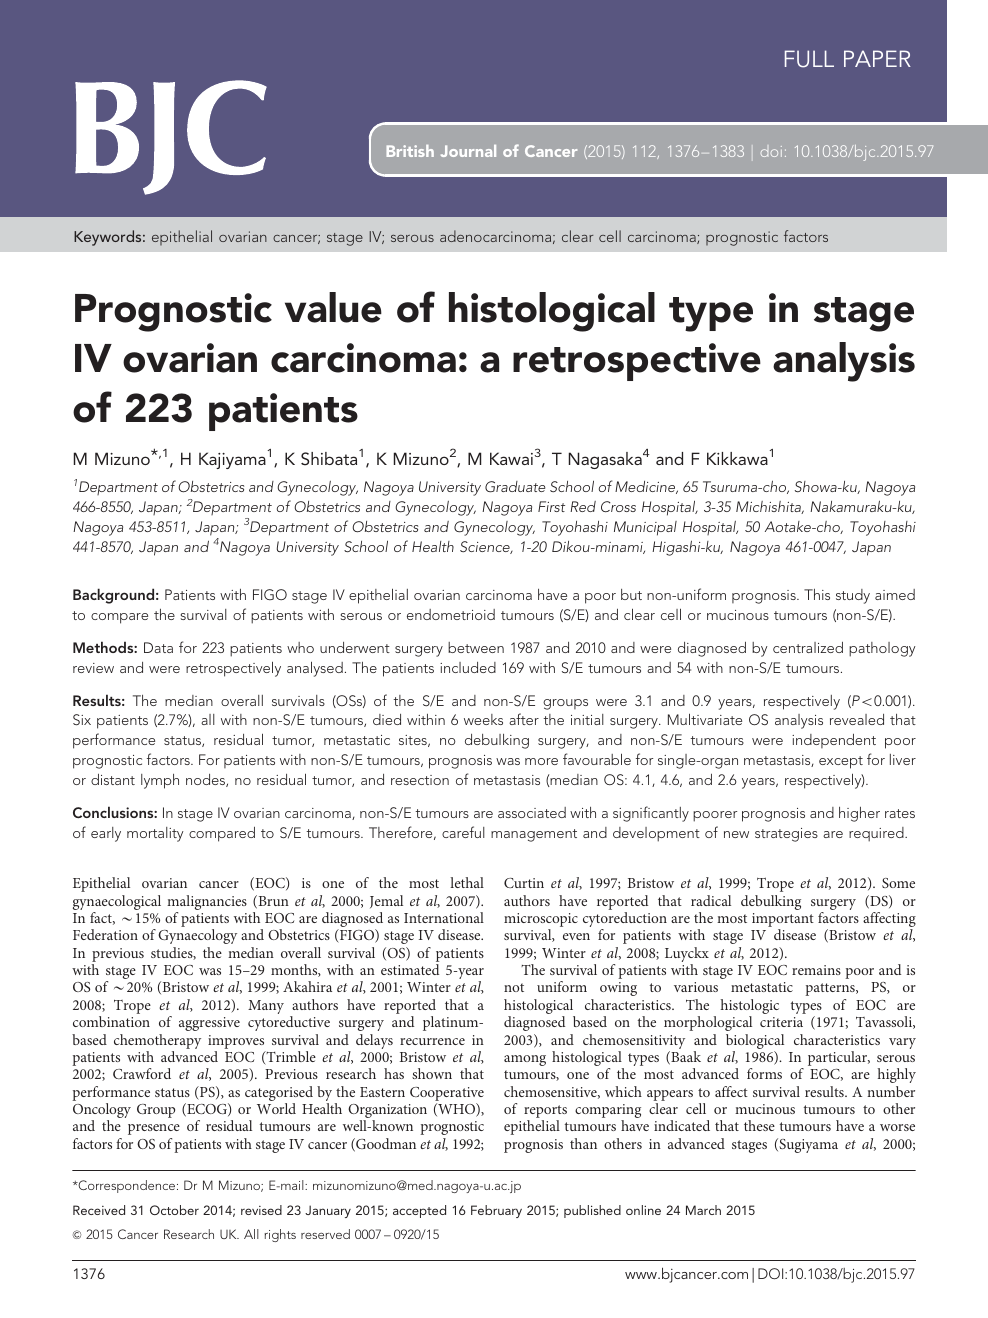 Prognostic Value Of Histological Type In Stage Iv Ovarian Carcinoma A Retrospective Analysis Of 223 Patients Topic Of Research Paper In Clinical Medicine Download Scholarly Article Pdf And Read For Free